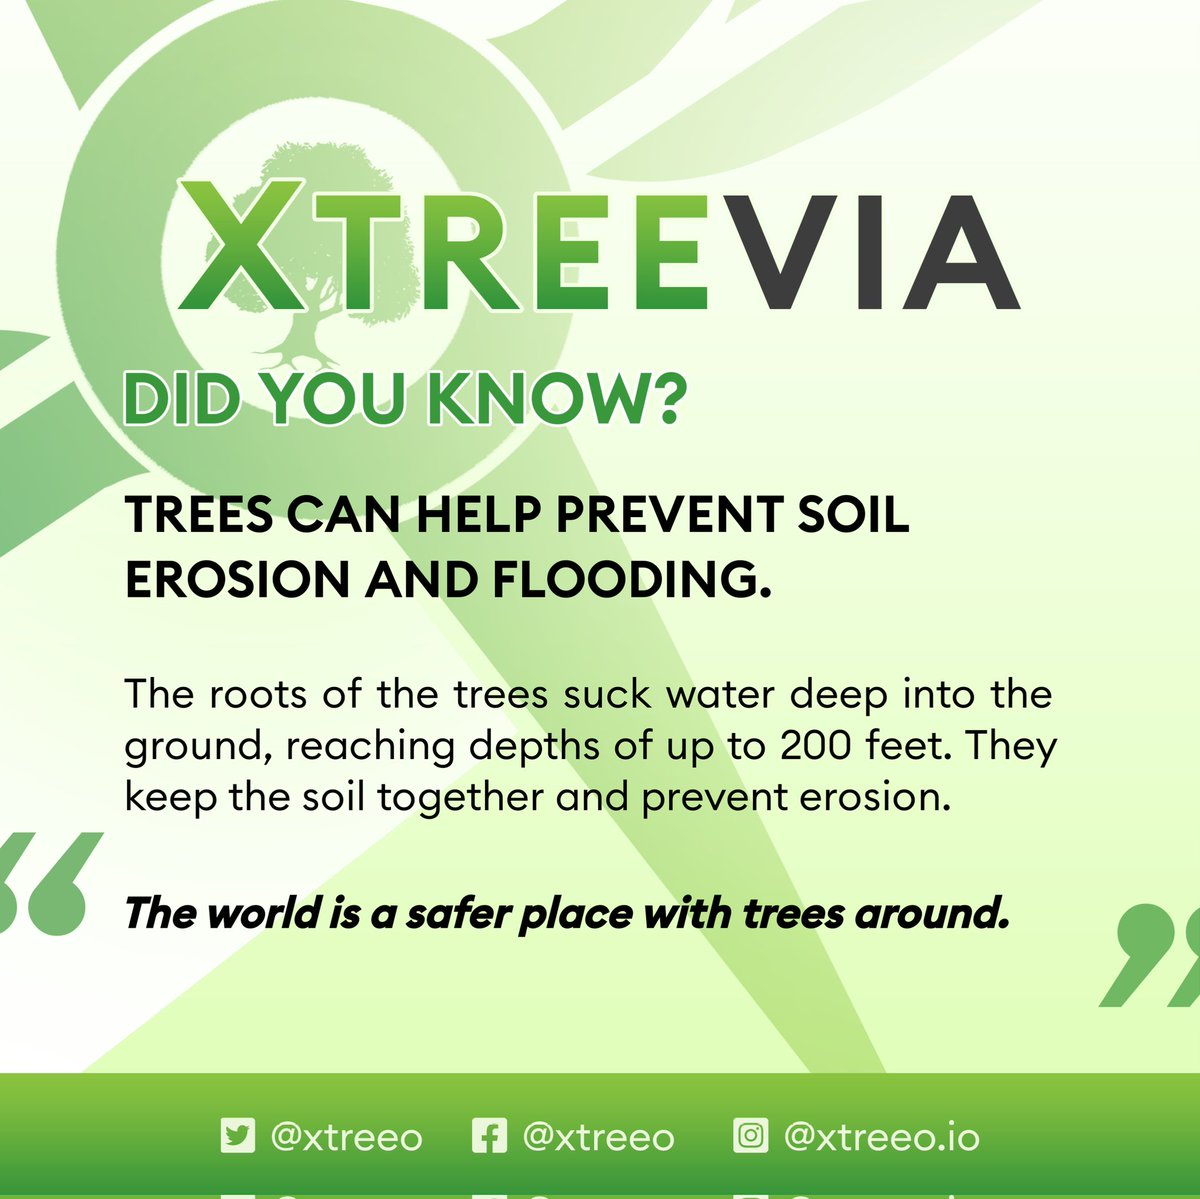 Did you know❓

Tress can help prevent soil erosion and flooding.

' The world is a safe place when trees around. '

🌿 XTreevia

#NFTCommunity #NFT #ETH #XTreeO  #xtreeordinary #environmentfriendly #treeplanting #savetheearth #savelives